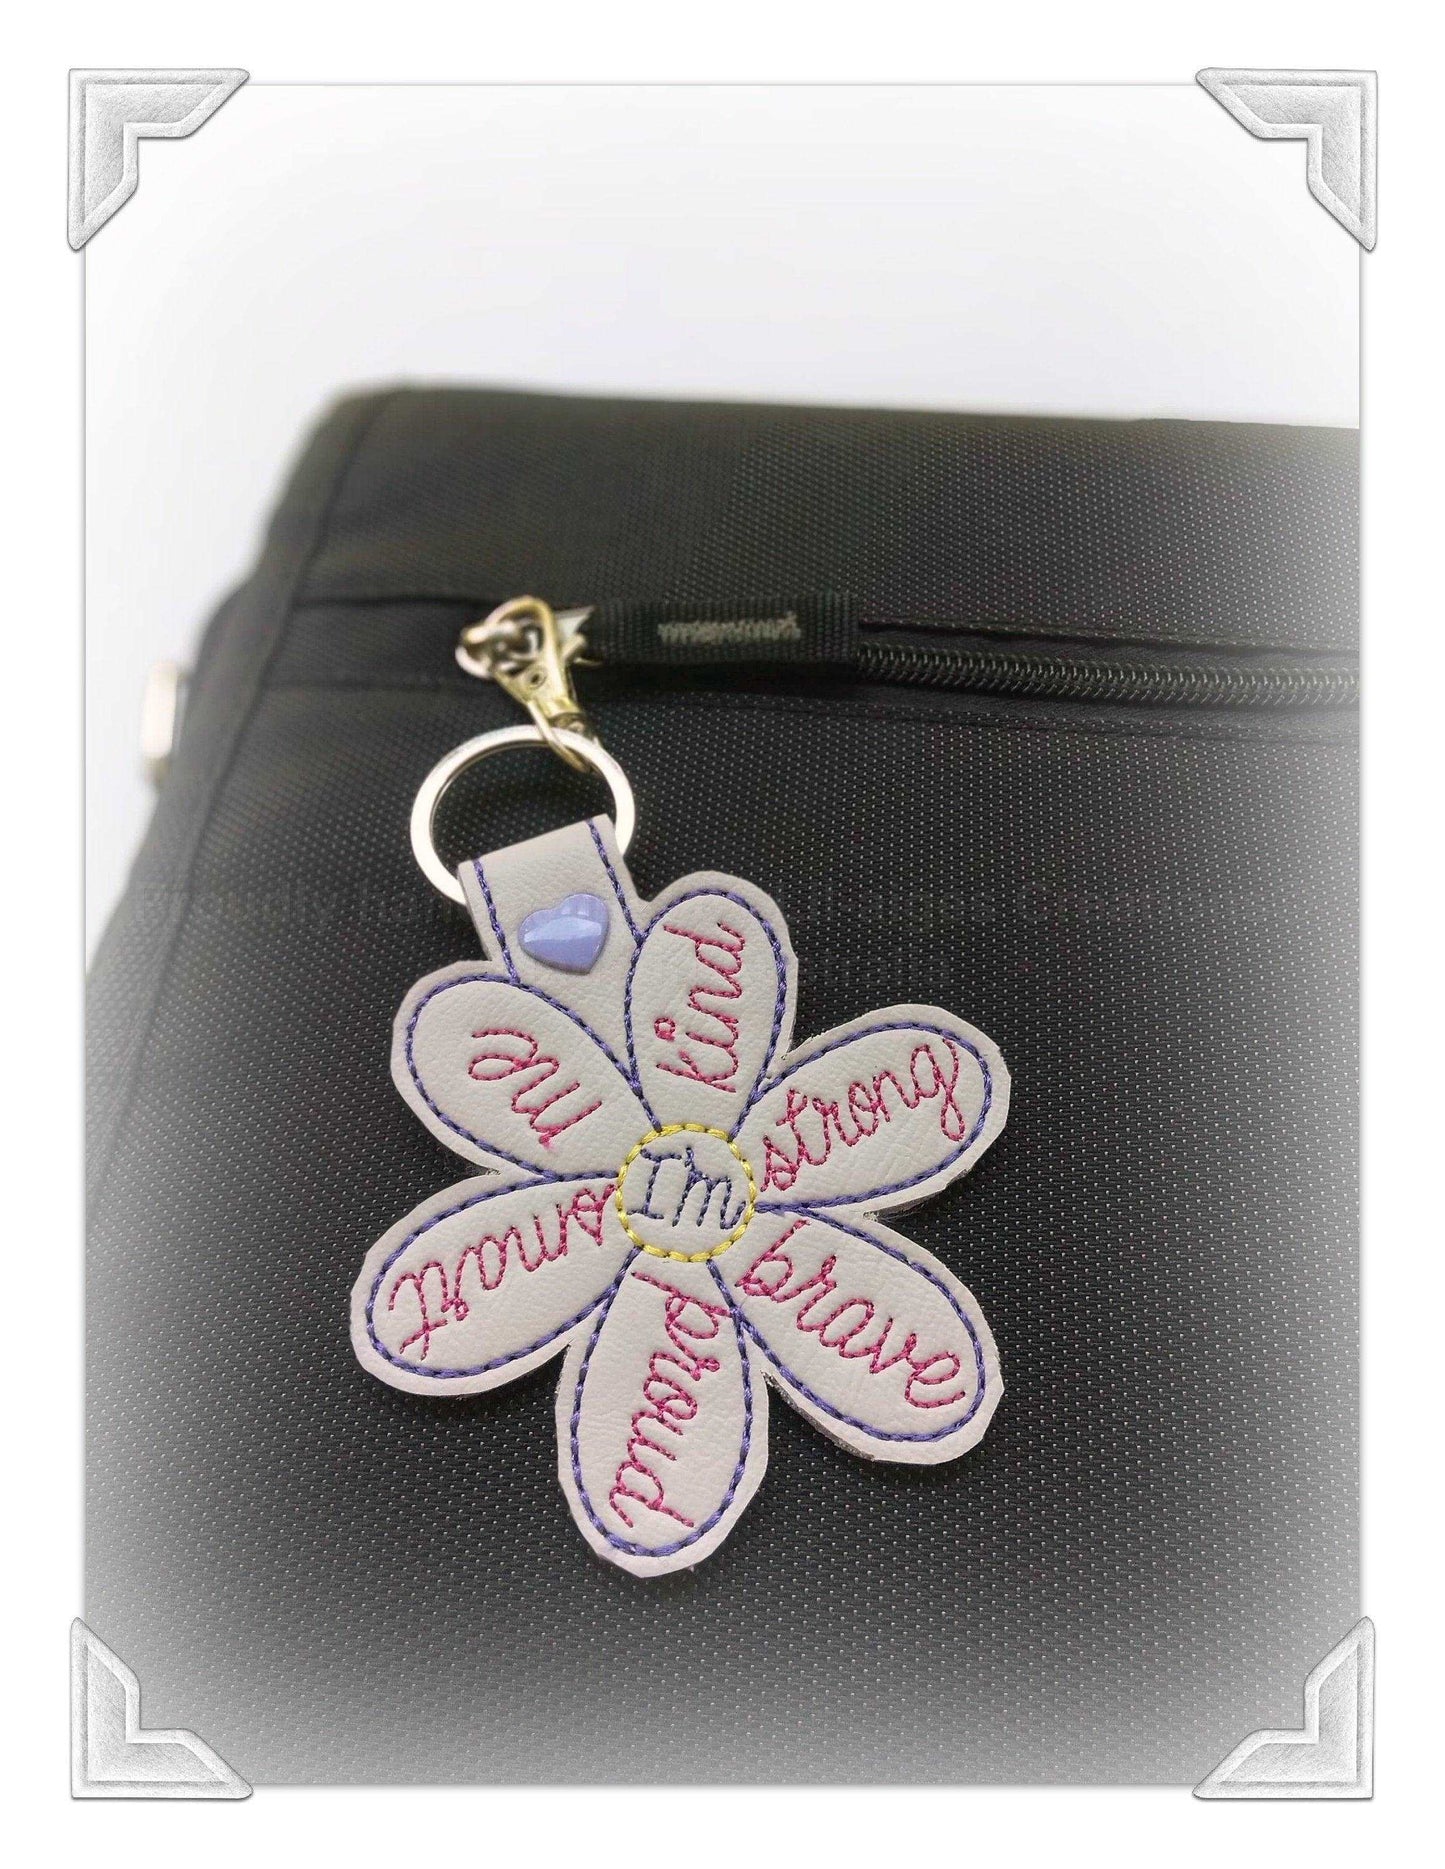 Inspirational keyrings, self confidence, self esteem, mindfulness, gift ideas, keychains, key fobs, available now, made in Australia - Lil-aiges Creations - Quality Australian-made Gifts